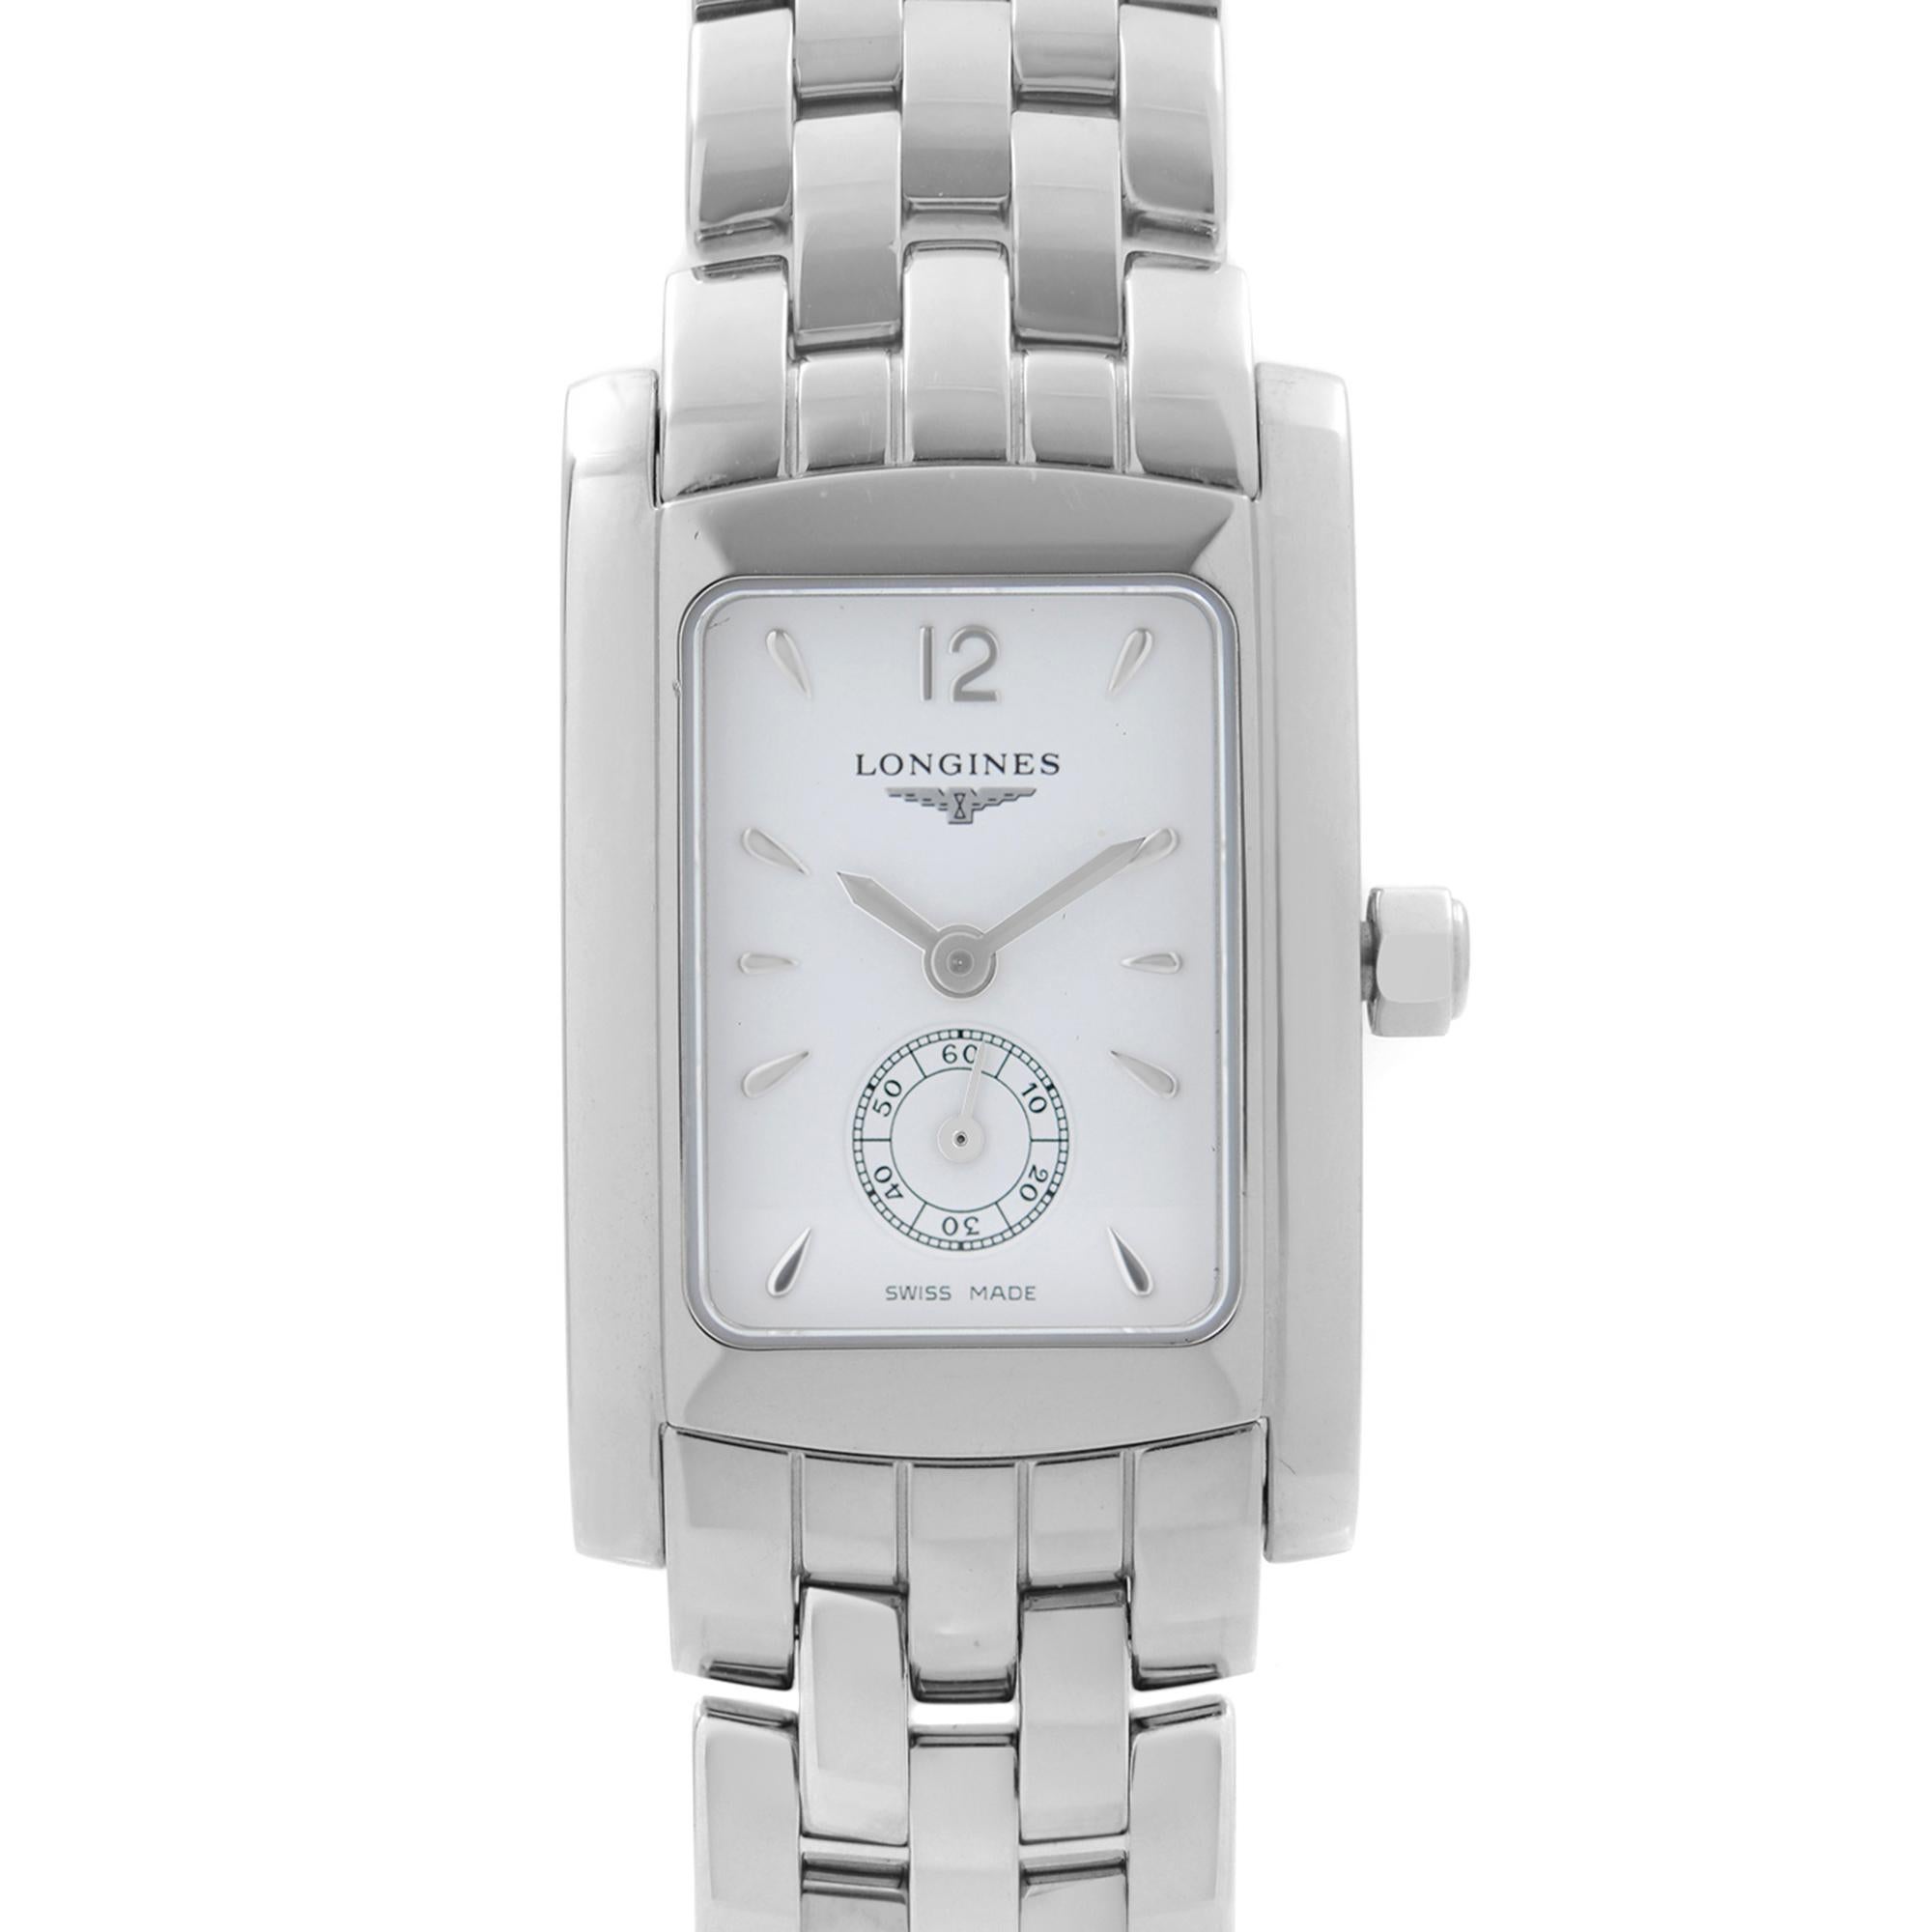 Display Model Longines DolceVita Stainless Steel White Dial Quartz Ladies Watch L5.155.4.16.6. This Beautiful Timepiece Features: Stainless Steel Case & Bracelet, Fixed Stainless Steel Bezel, White Dial with Silver-Tone Hands and Index Hour Markers,